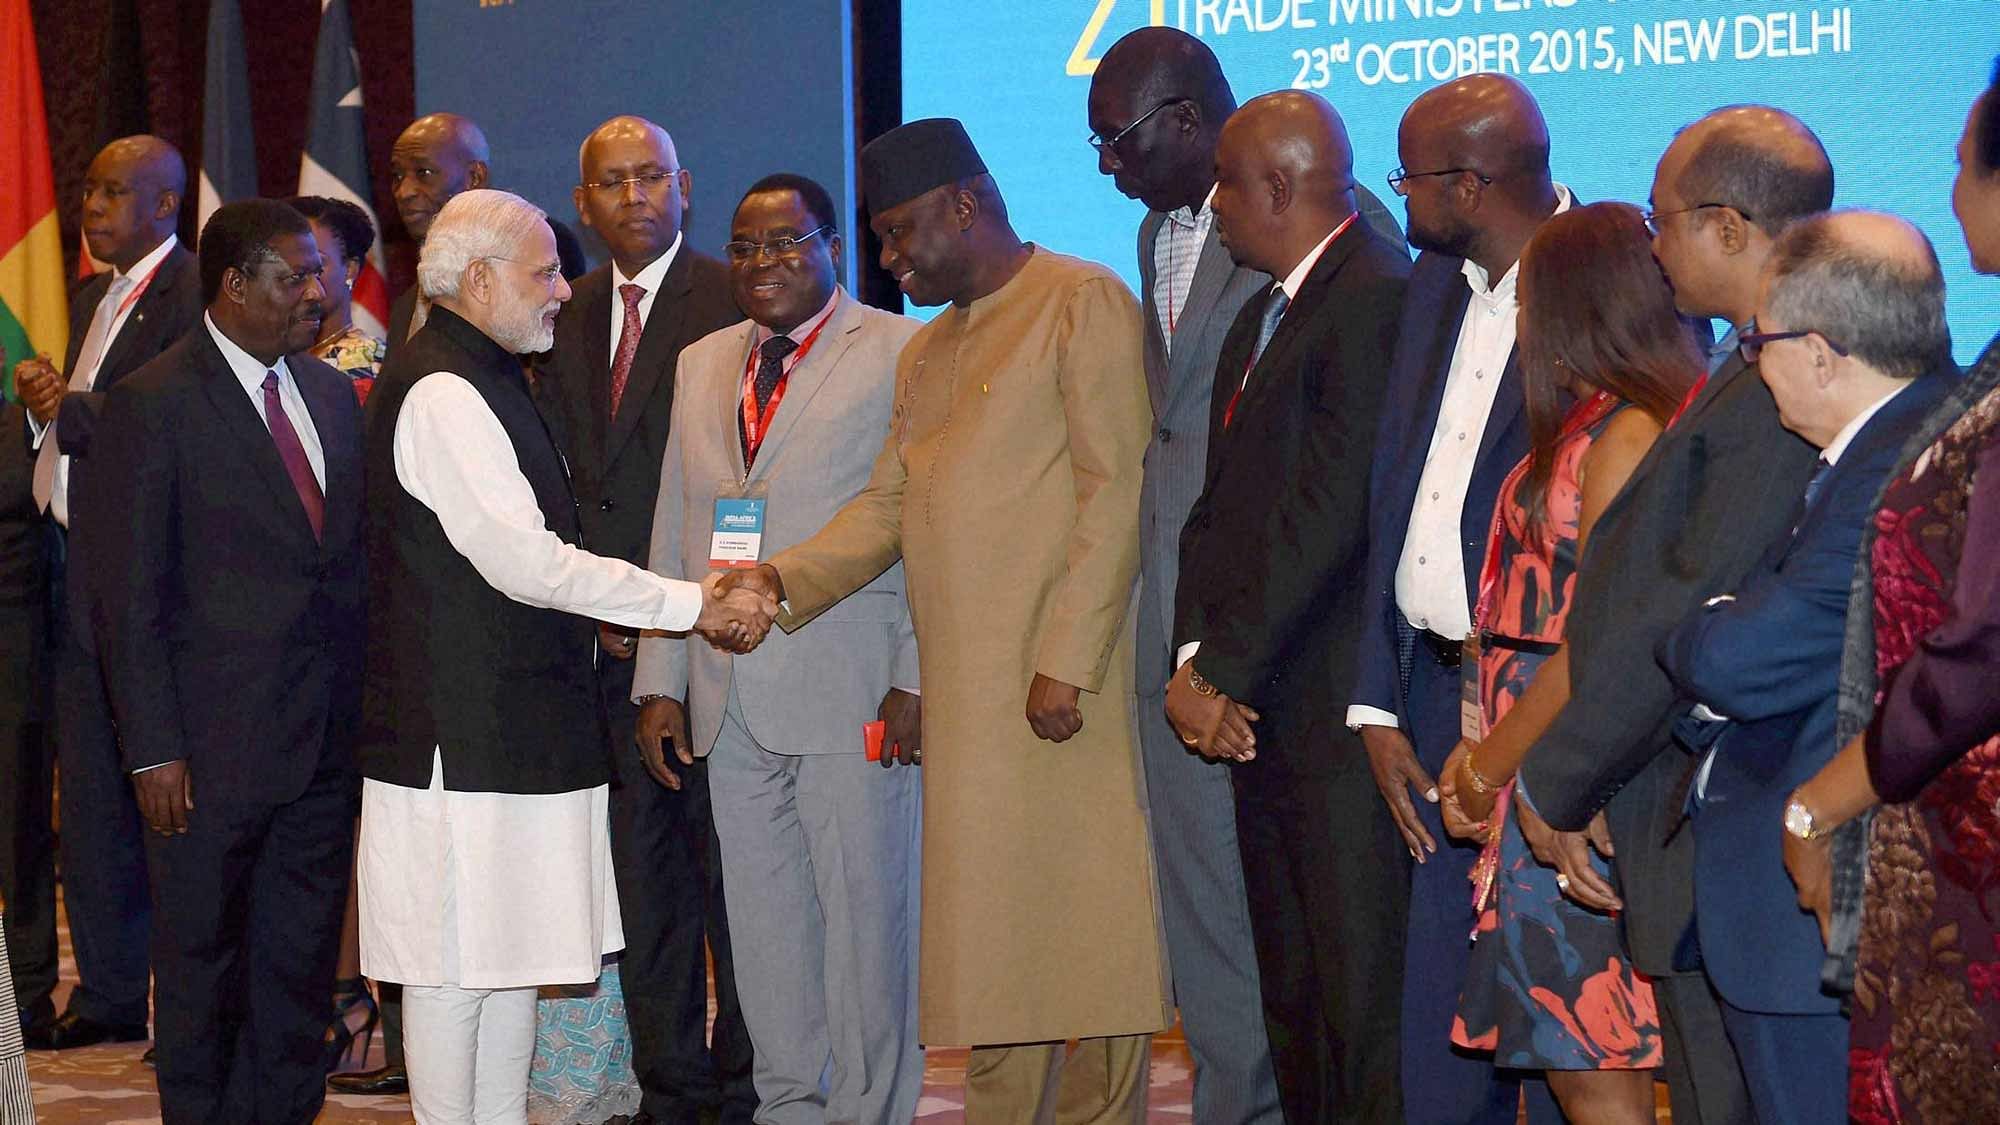 Prime Minister Modi meets delegates of African countries at the India-Africa Trade Ministers’ Meeting in New Delhi. (Photo: PTI)